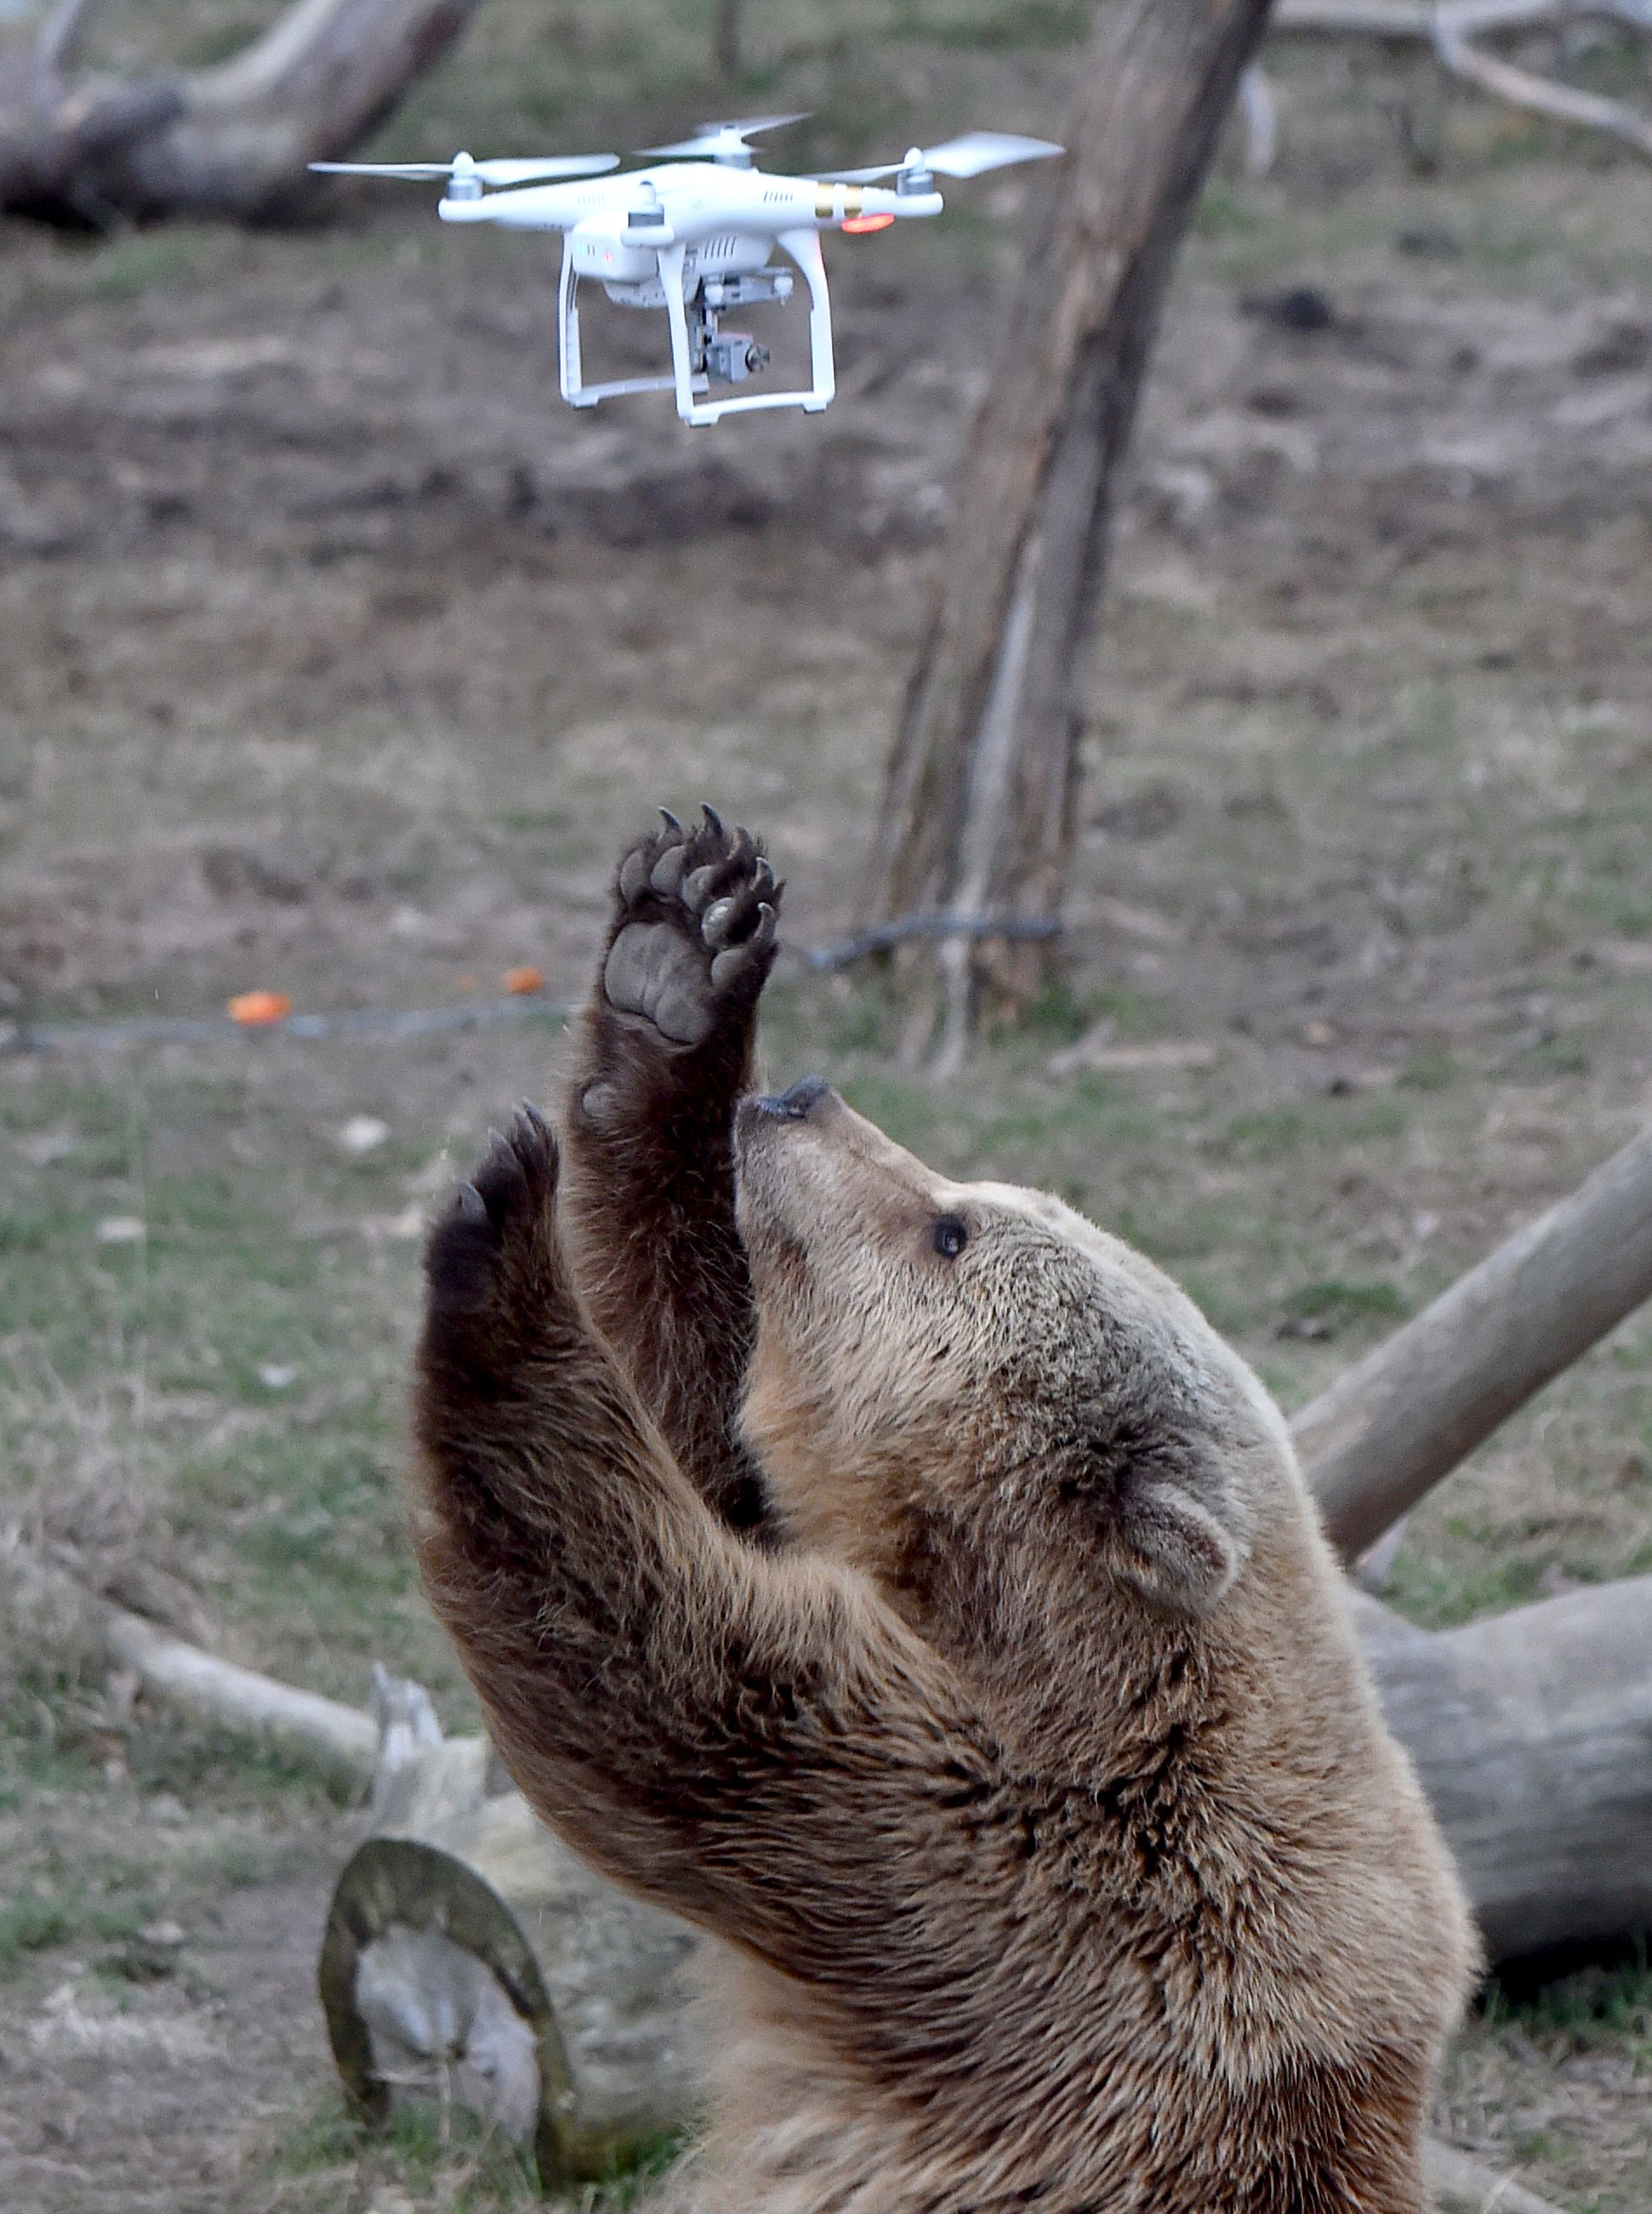 A brown bear reacts to a quadrocopter drone launched by a visitor in a shelter for bears rescued from circuses and private restaurants of Ukraine, near Zhytomyr, some 150 km west of Kiev, on March 24, 2017. Tortured for years by human hands these mighty animals got a chance to start it all over again in a shelter near the city of Zhytomyr, in the northwest of the country. Opened in 2012 by international animal charity Four Paws, the rescue centre soon became one of the biggest sights of the region. / AFP PHOTO / Sergei SUPINSKY